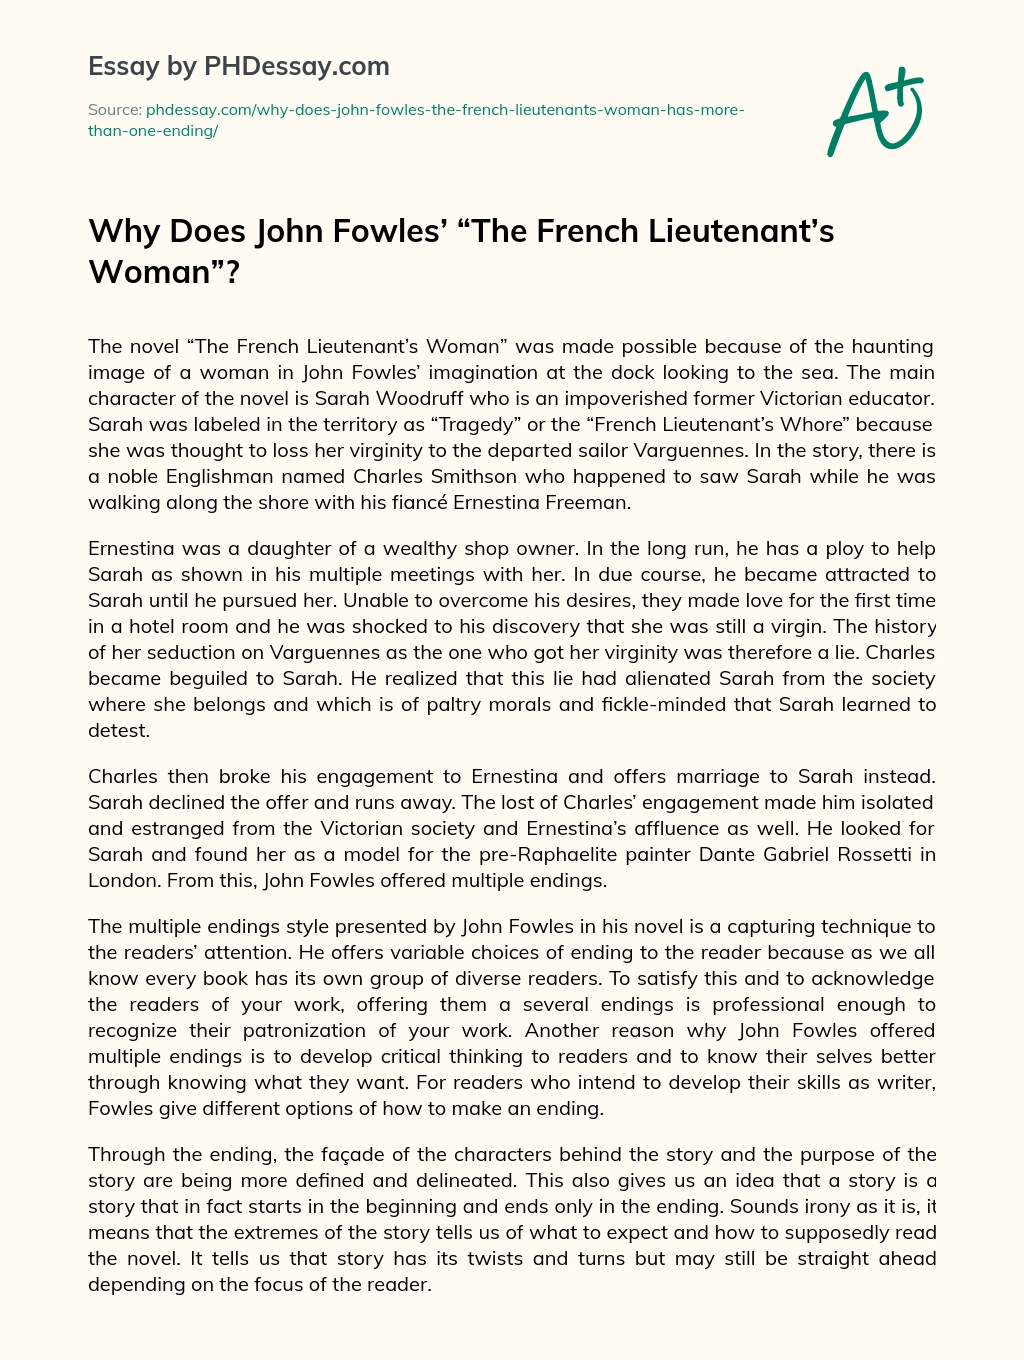 Why Does John Fowles’ “The French Lieutenant’s Woman”? essay